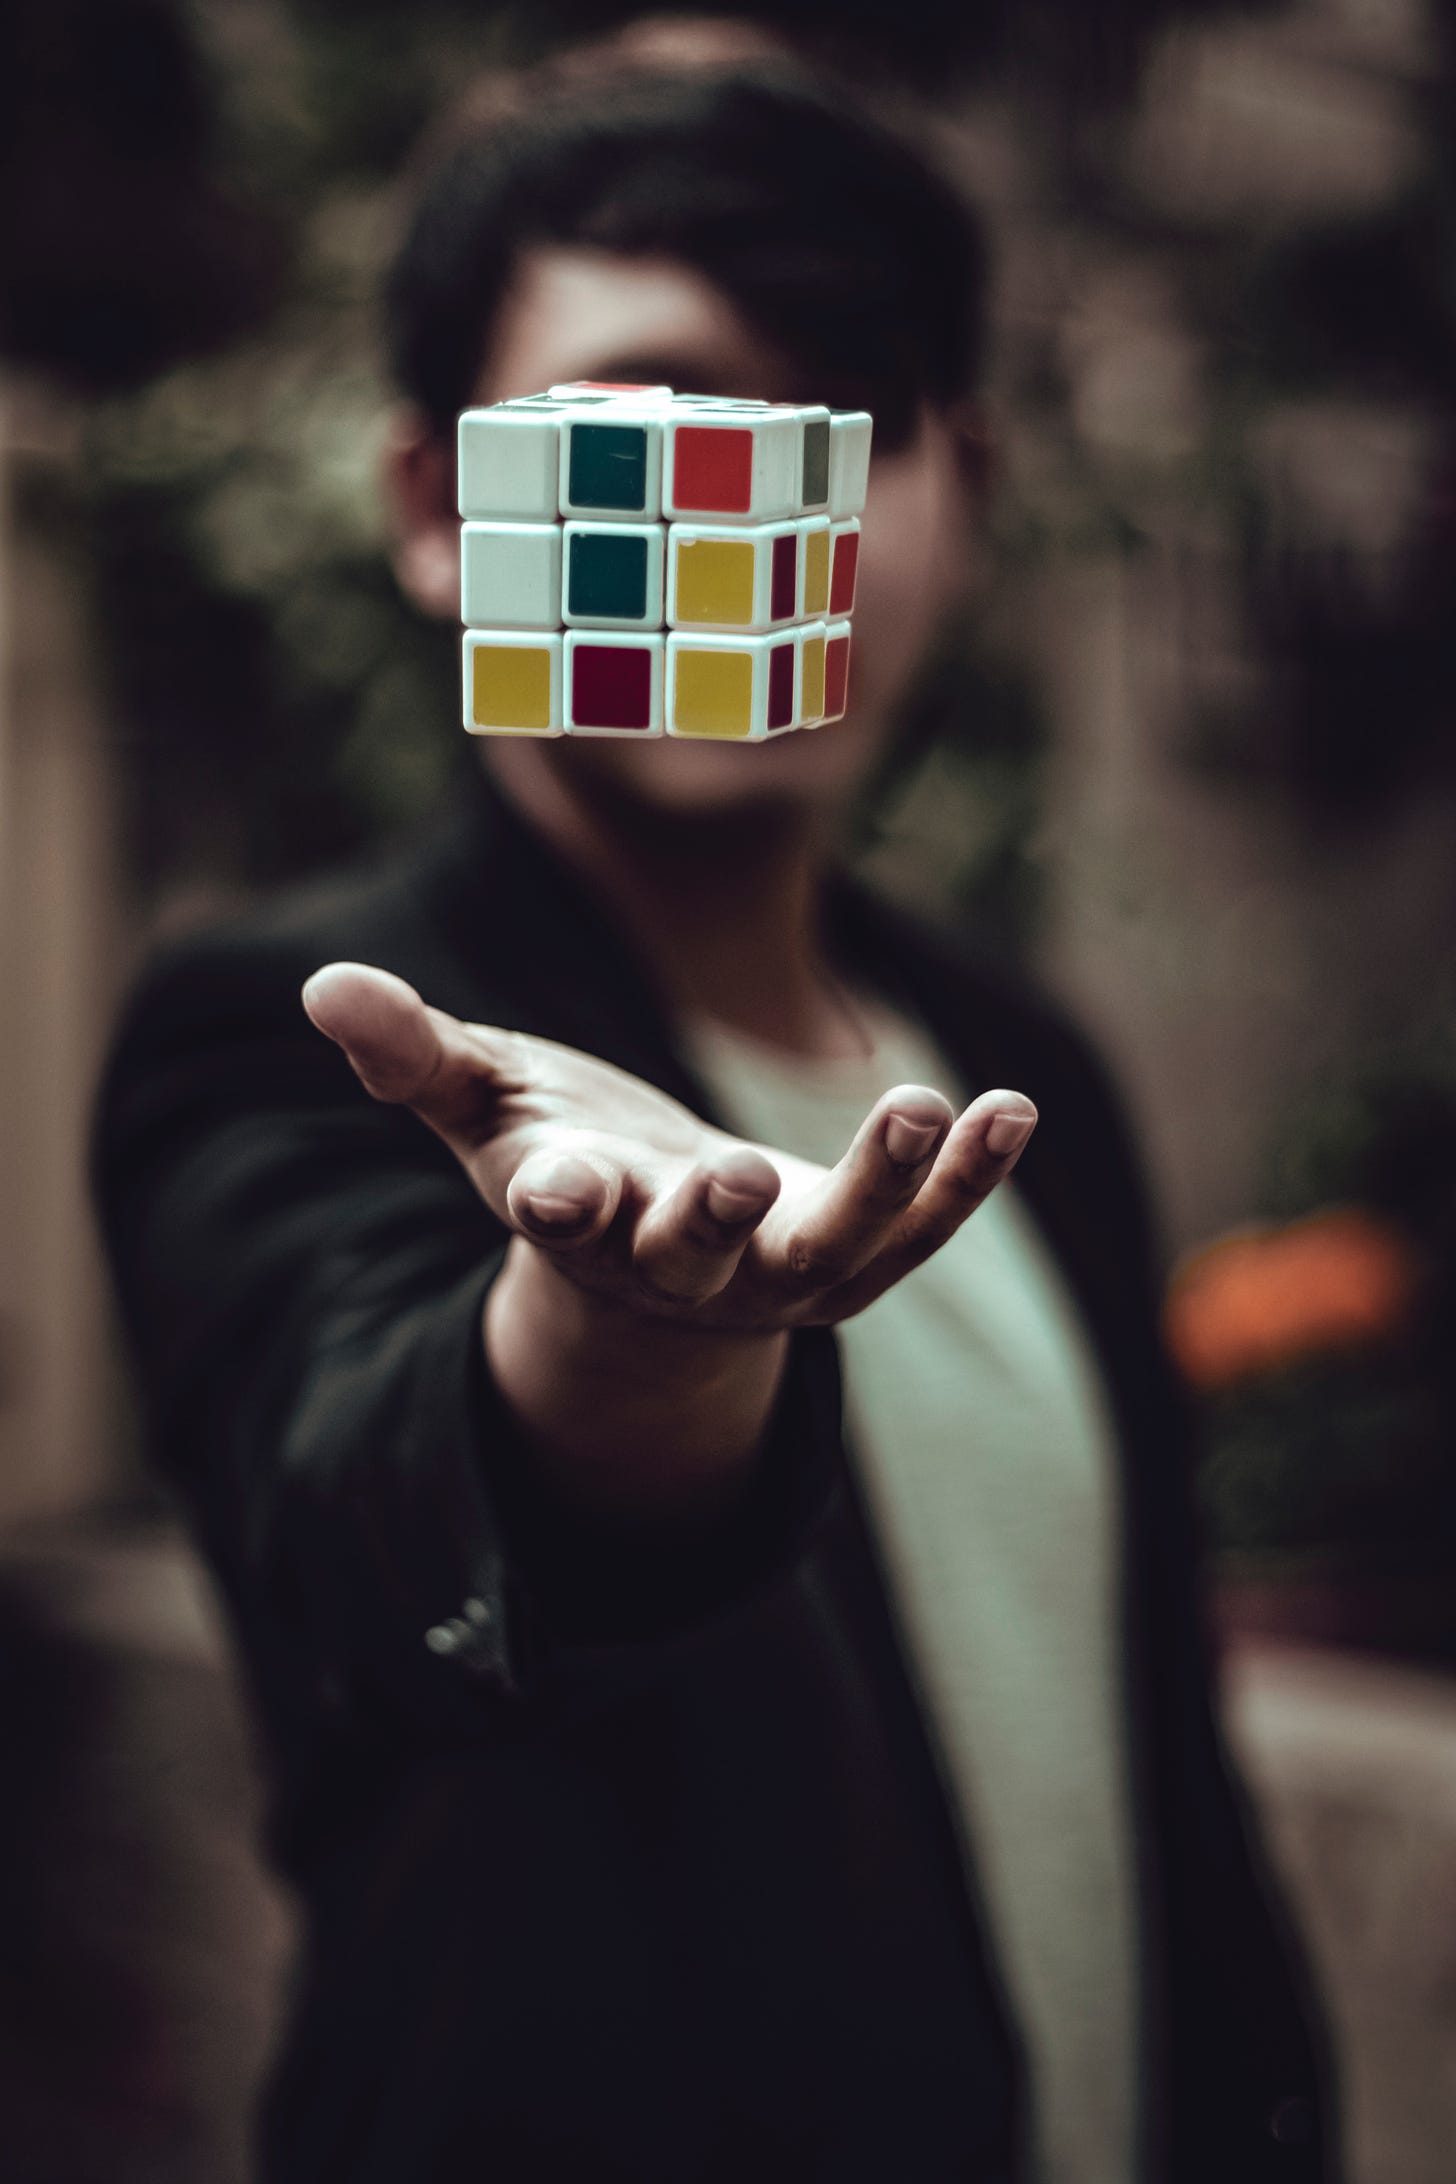 Man tossing rubic cube toward the viewer